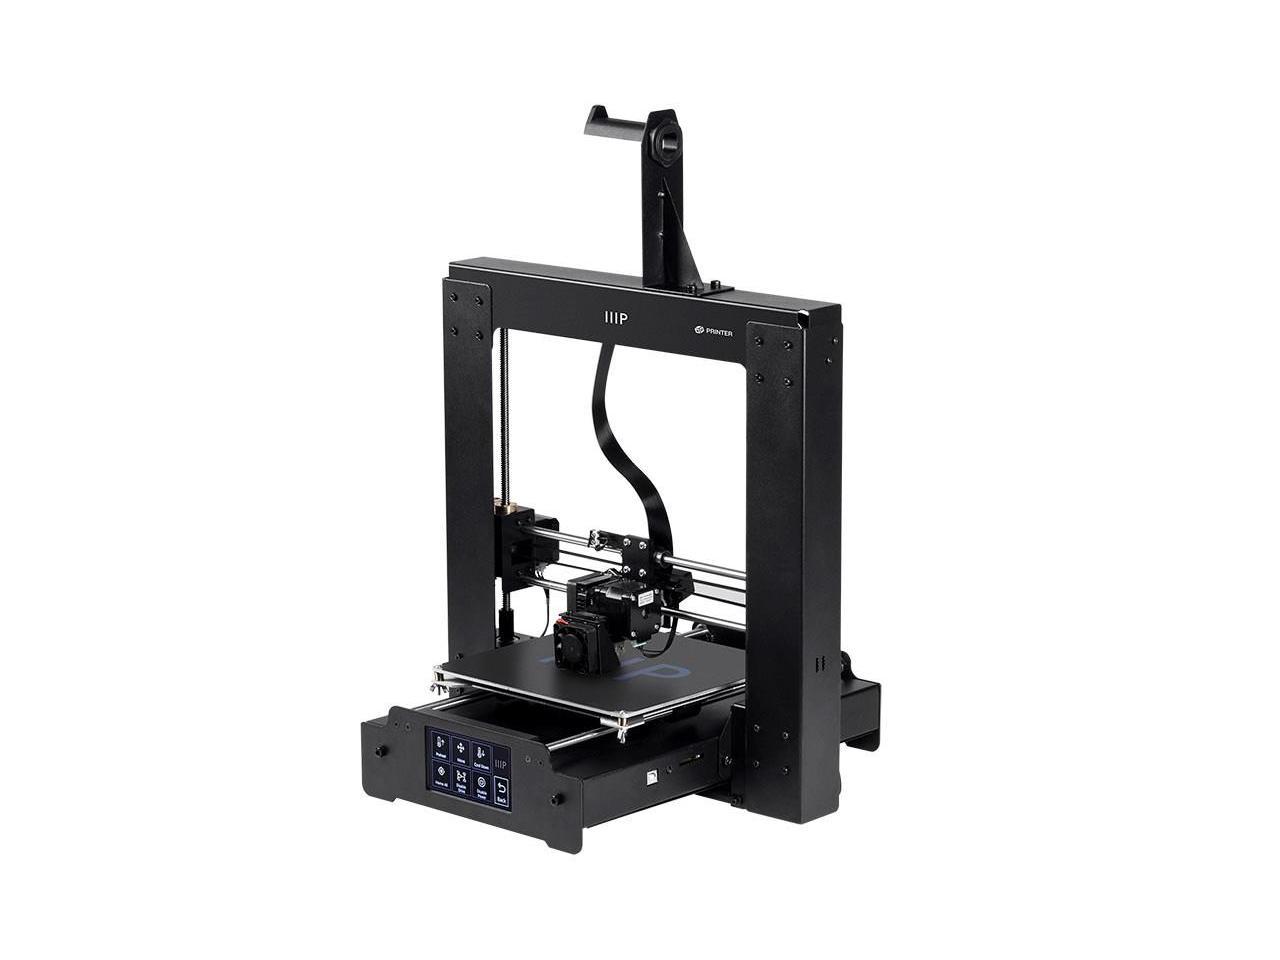 Monoprice Maker Select Plus 3D Printer With Large Heated (200 X 200 X 180 mm) Build Plate, LCD Touchscreen Display + Free Sample PLA Filament And MicroSD Card Preloaded With Printable 3D Models